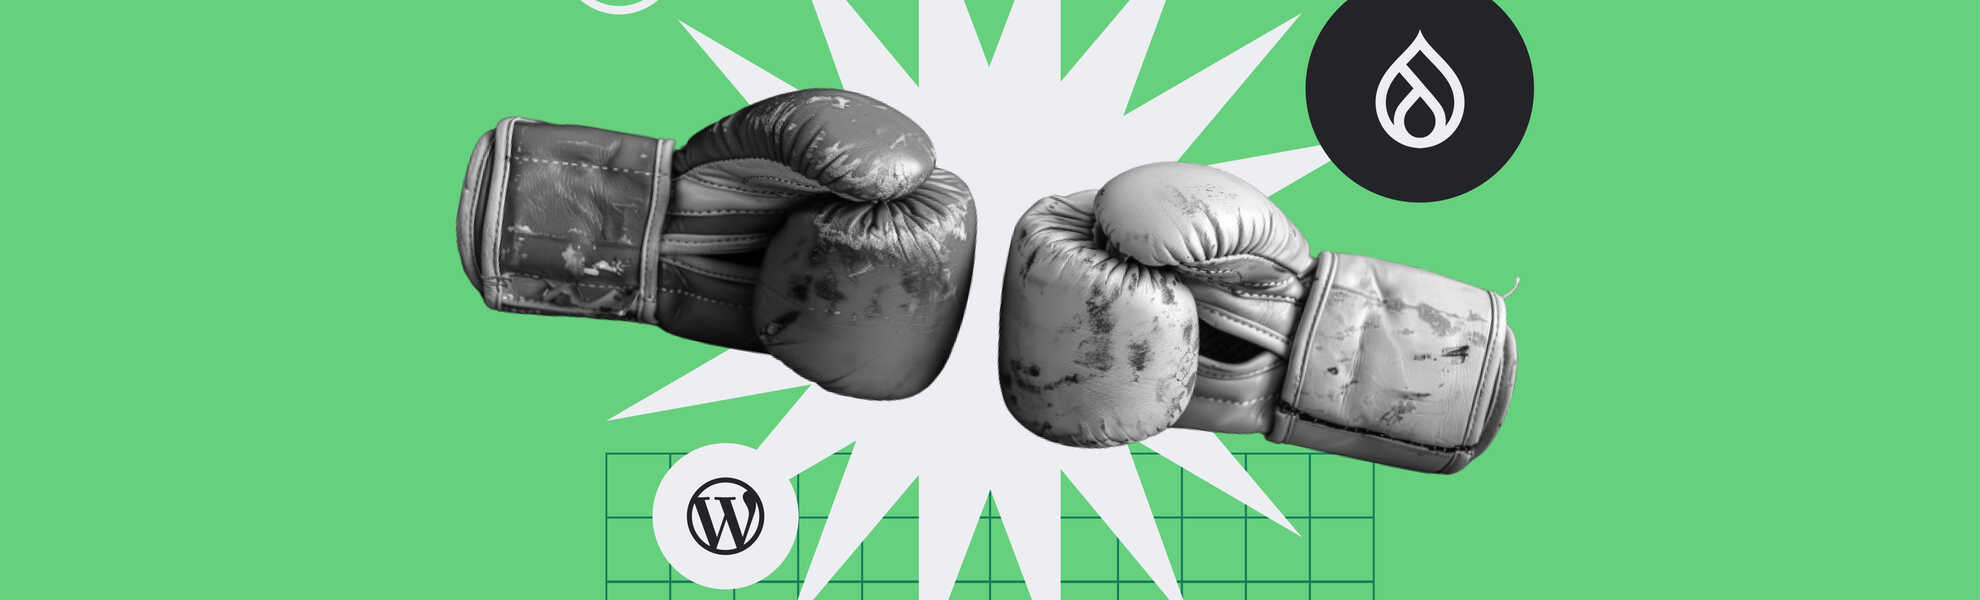 Boxing gloves face off on a green background